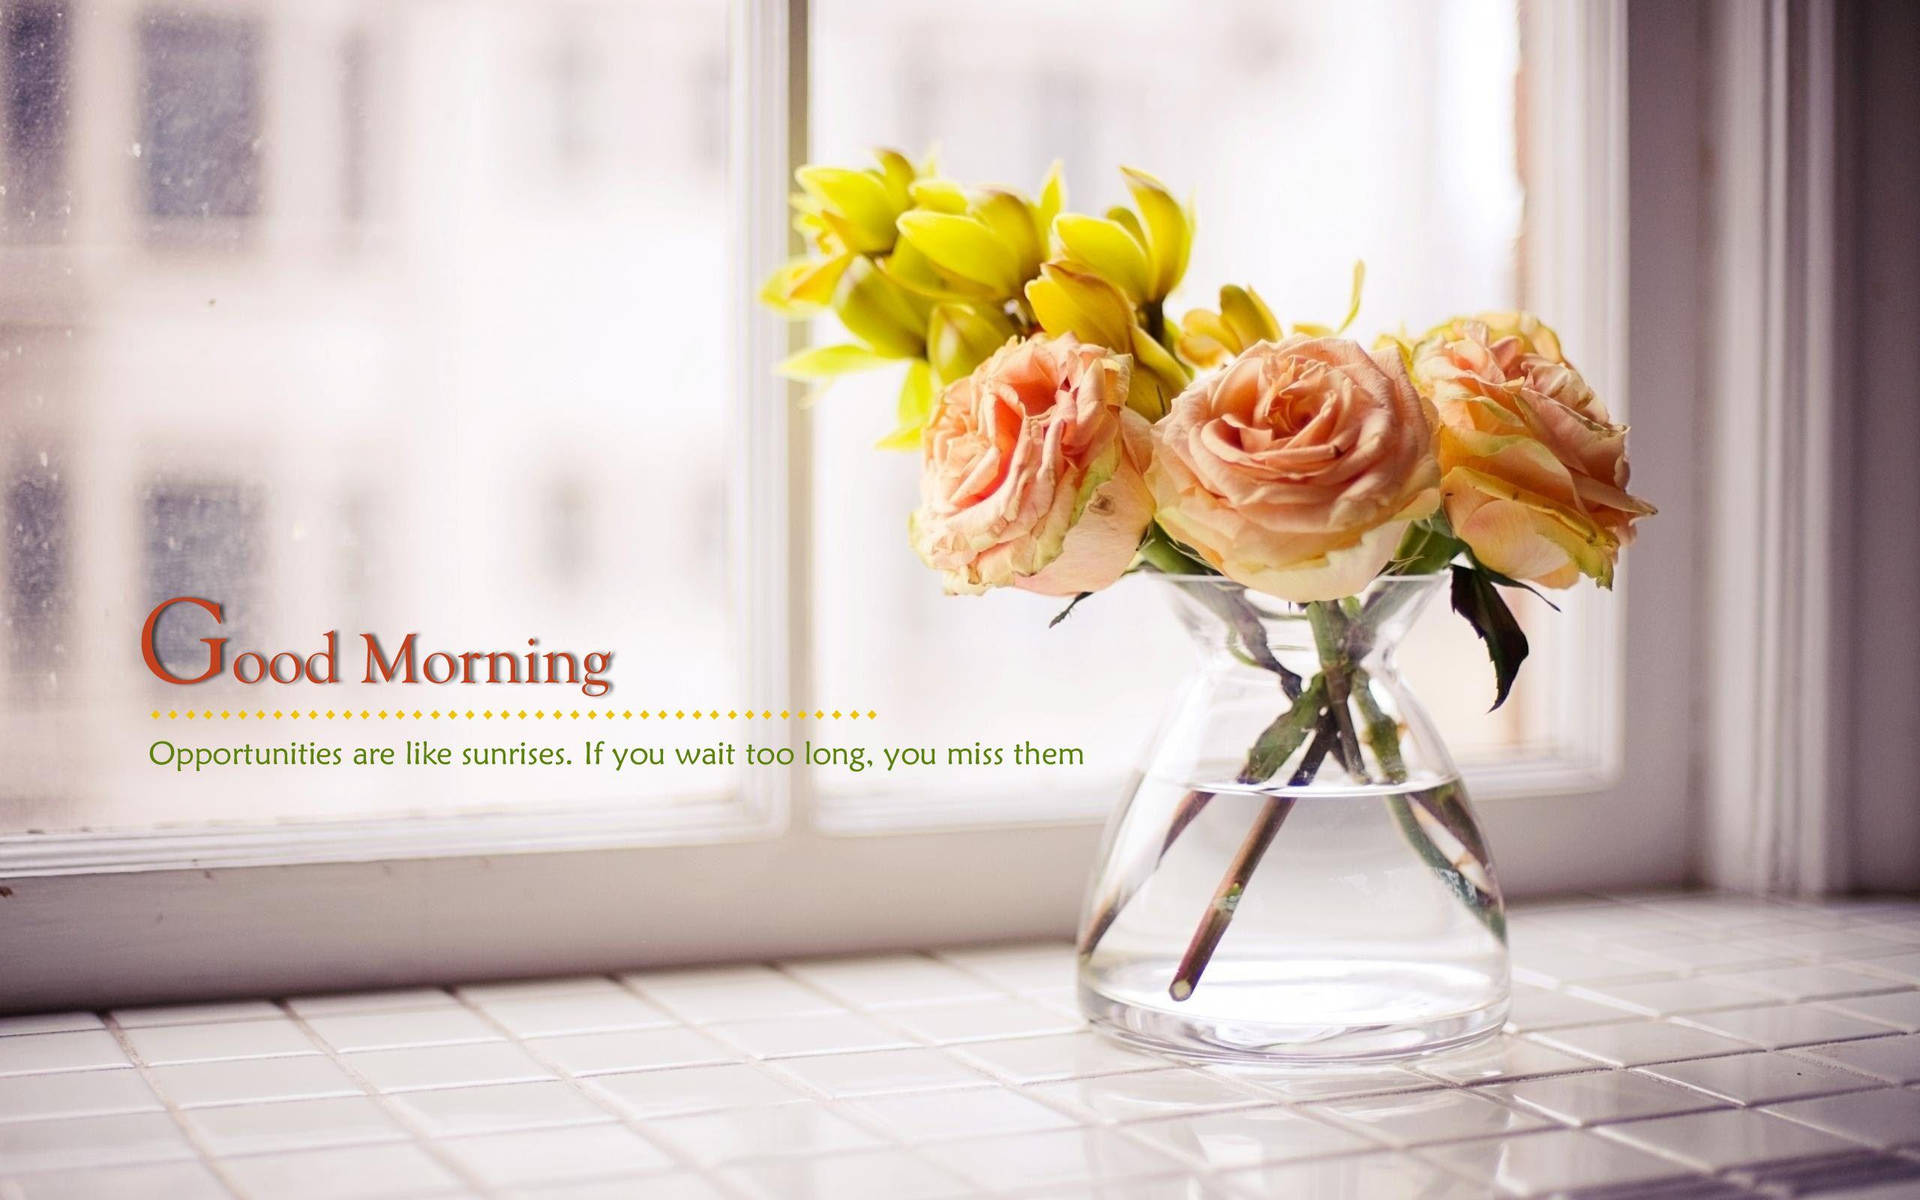 Good Morning Hd With Flower Bouquet